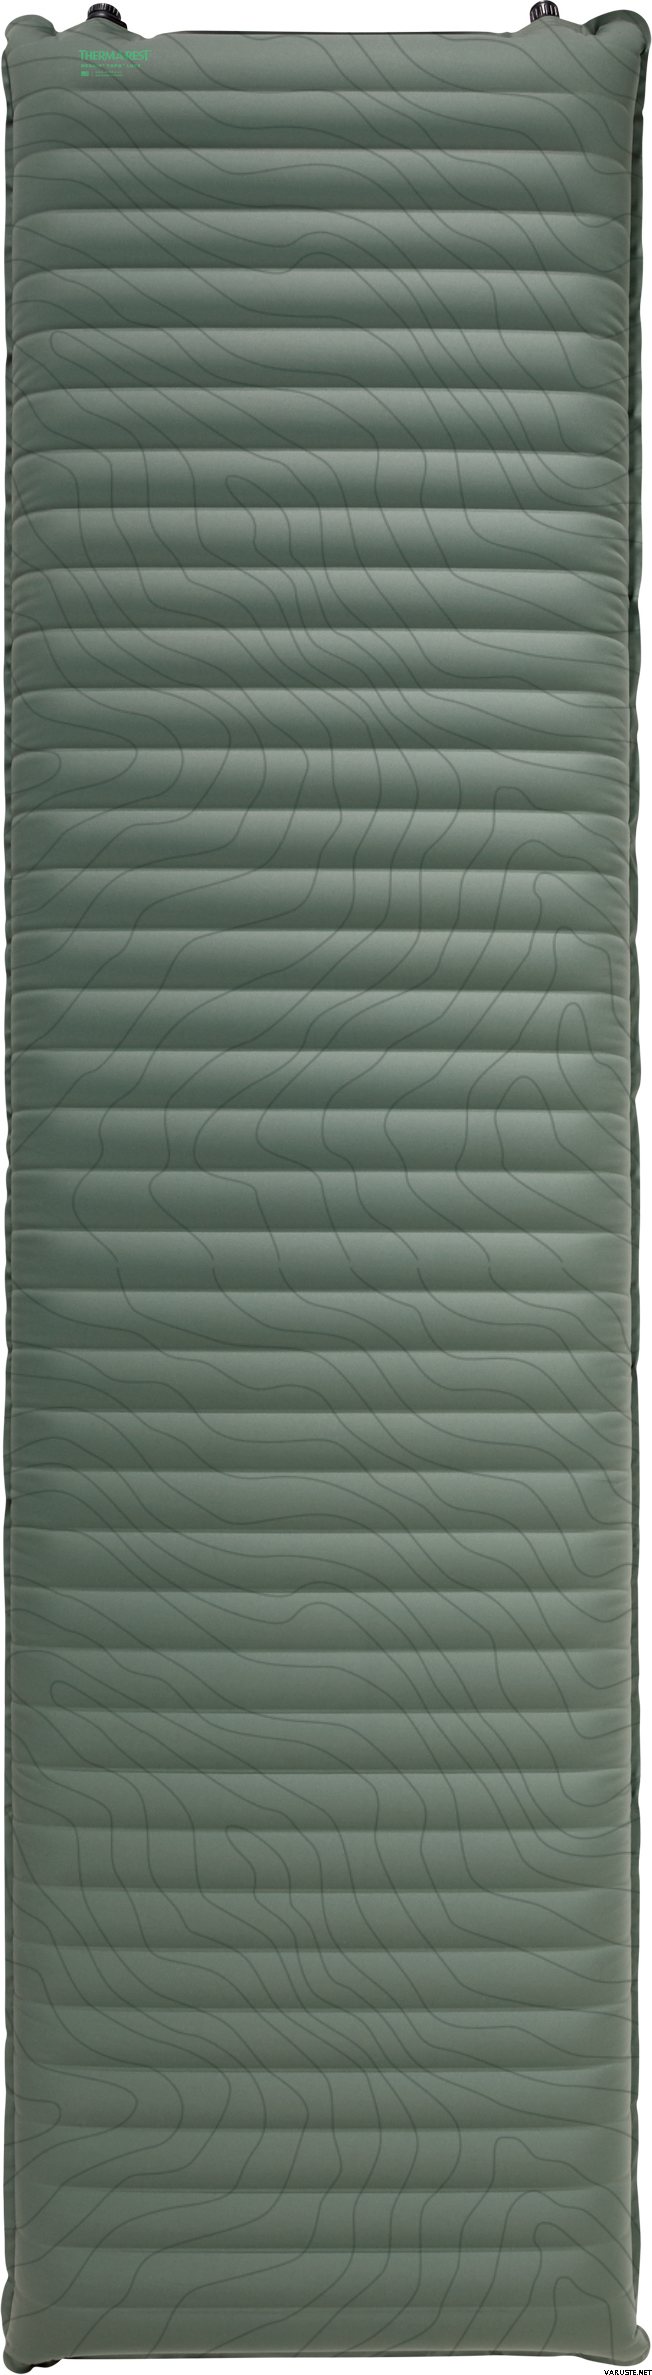 Therm-a-Rest NeoAir Topo Luxe Large | Inflatable sleeping pads